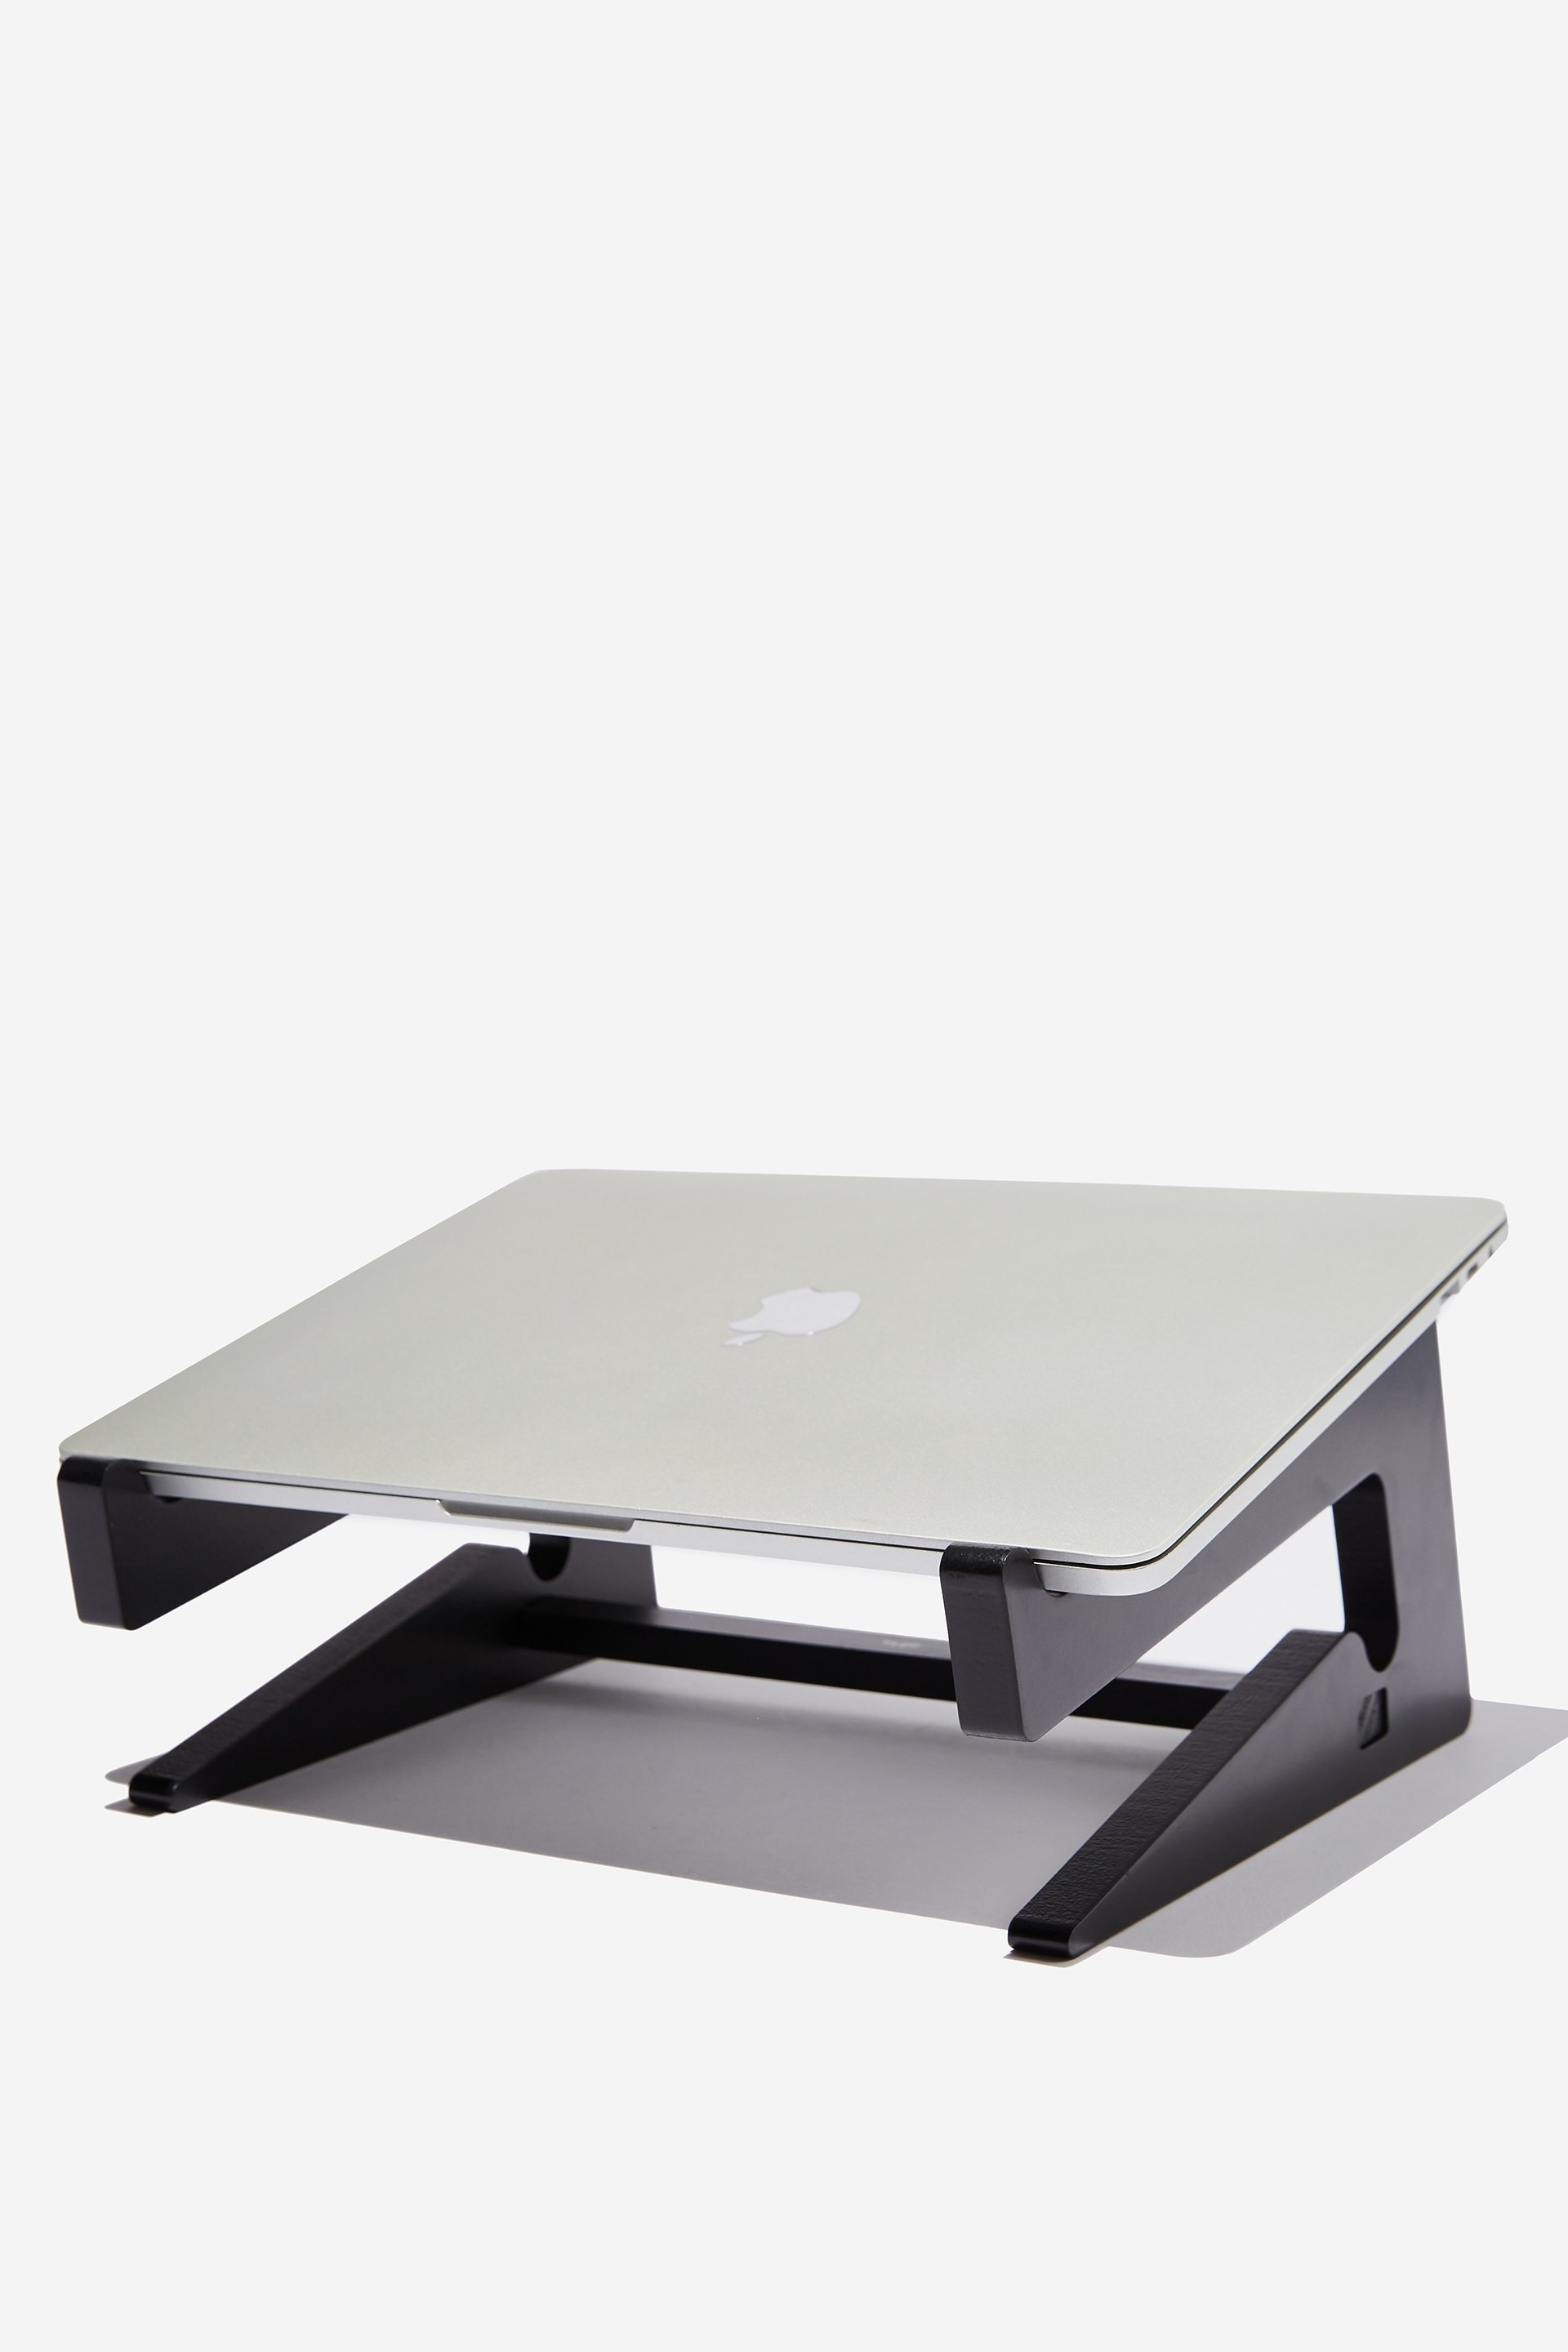 Laptop Lifter Wing - Home Desk Accessories